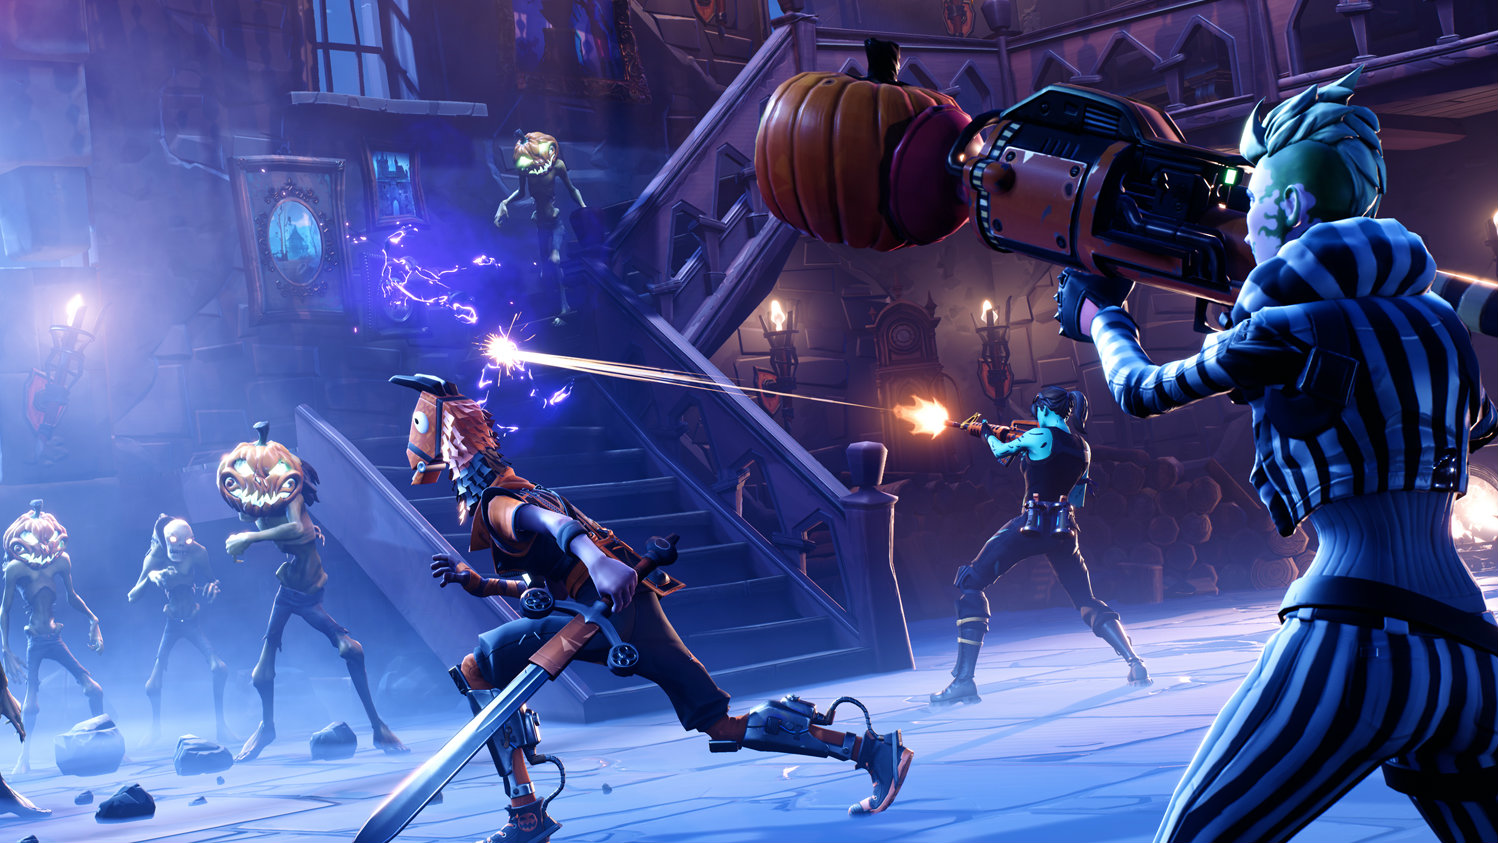 Fortnite Battle Royale adds new potion and character ... - 1498 x 843 jpeg 318kB